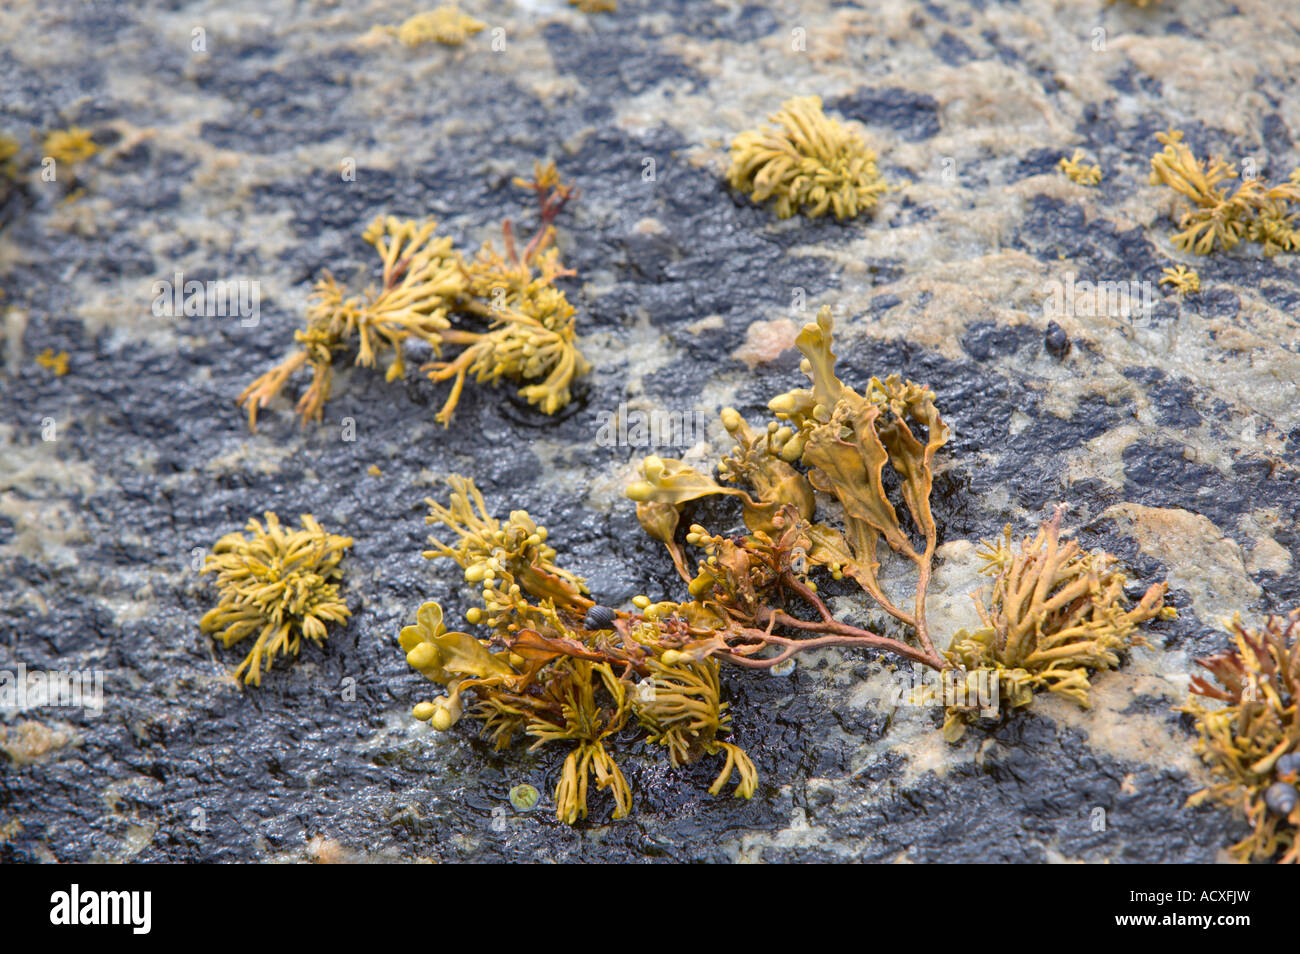 A detail of seaweed seedlings on rock surface Stock Photo